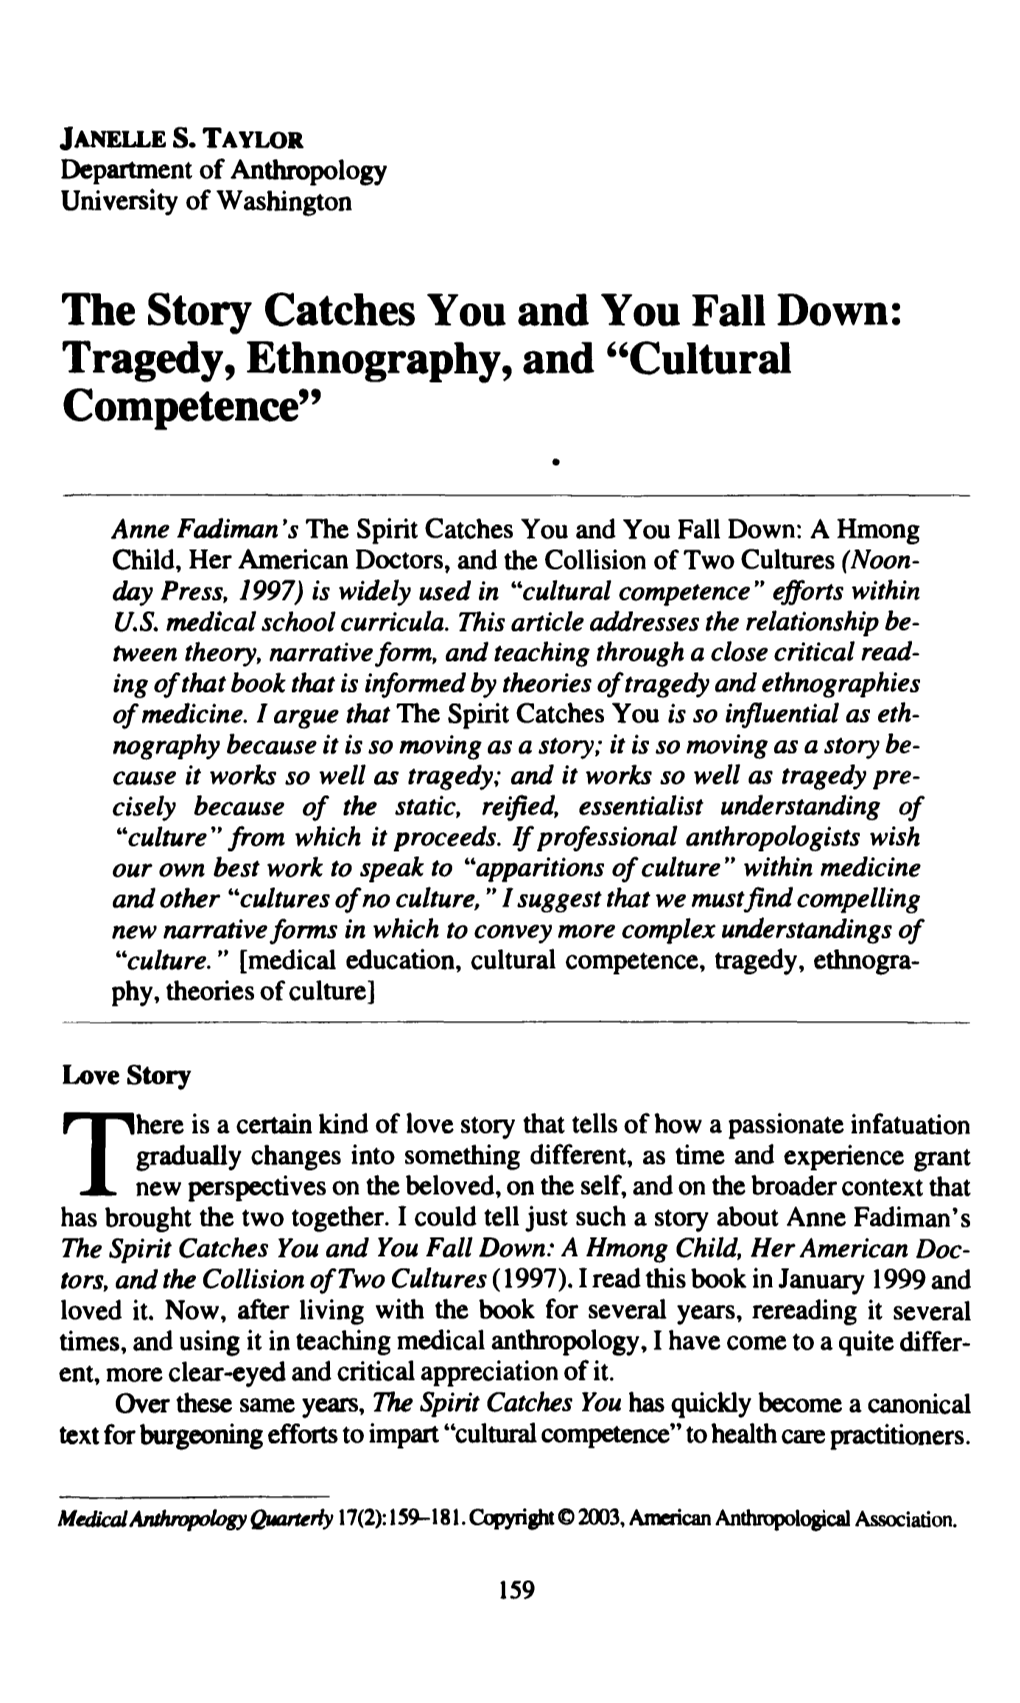 The Story Catches You and You Fall Down: Tragedy, Ethnography, and ''Cultural Competence"